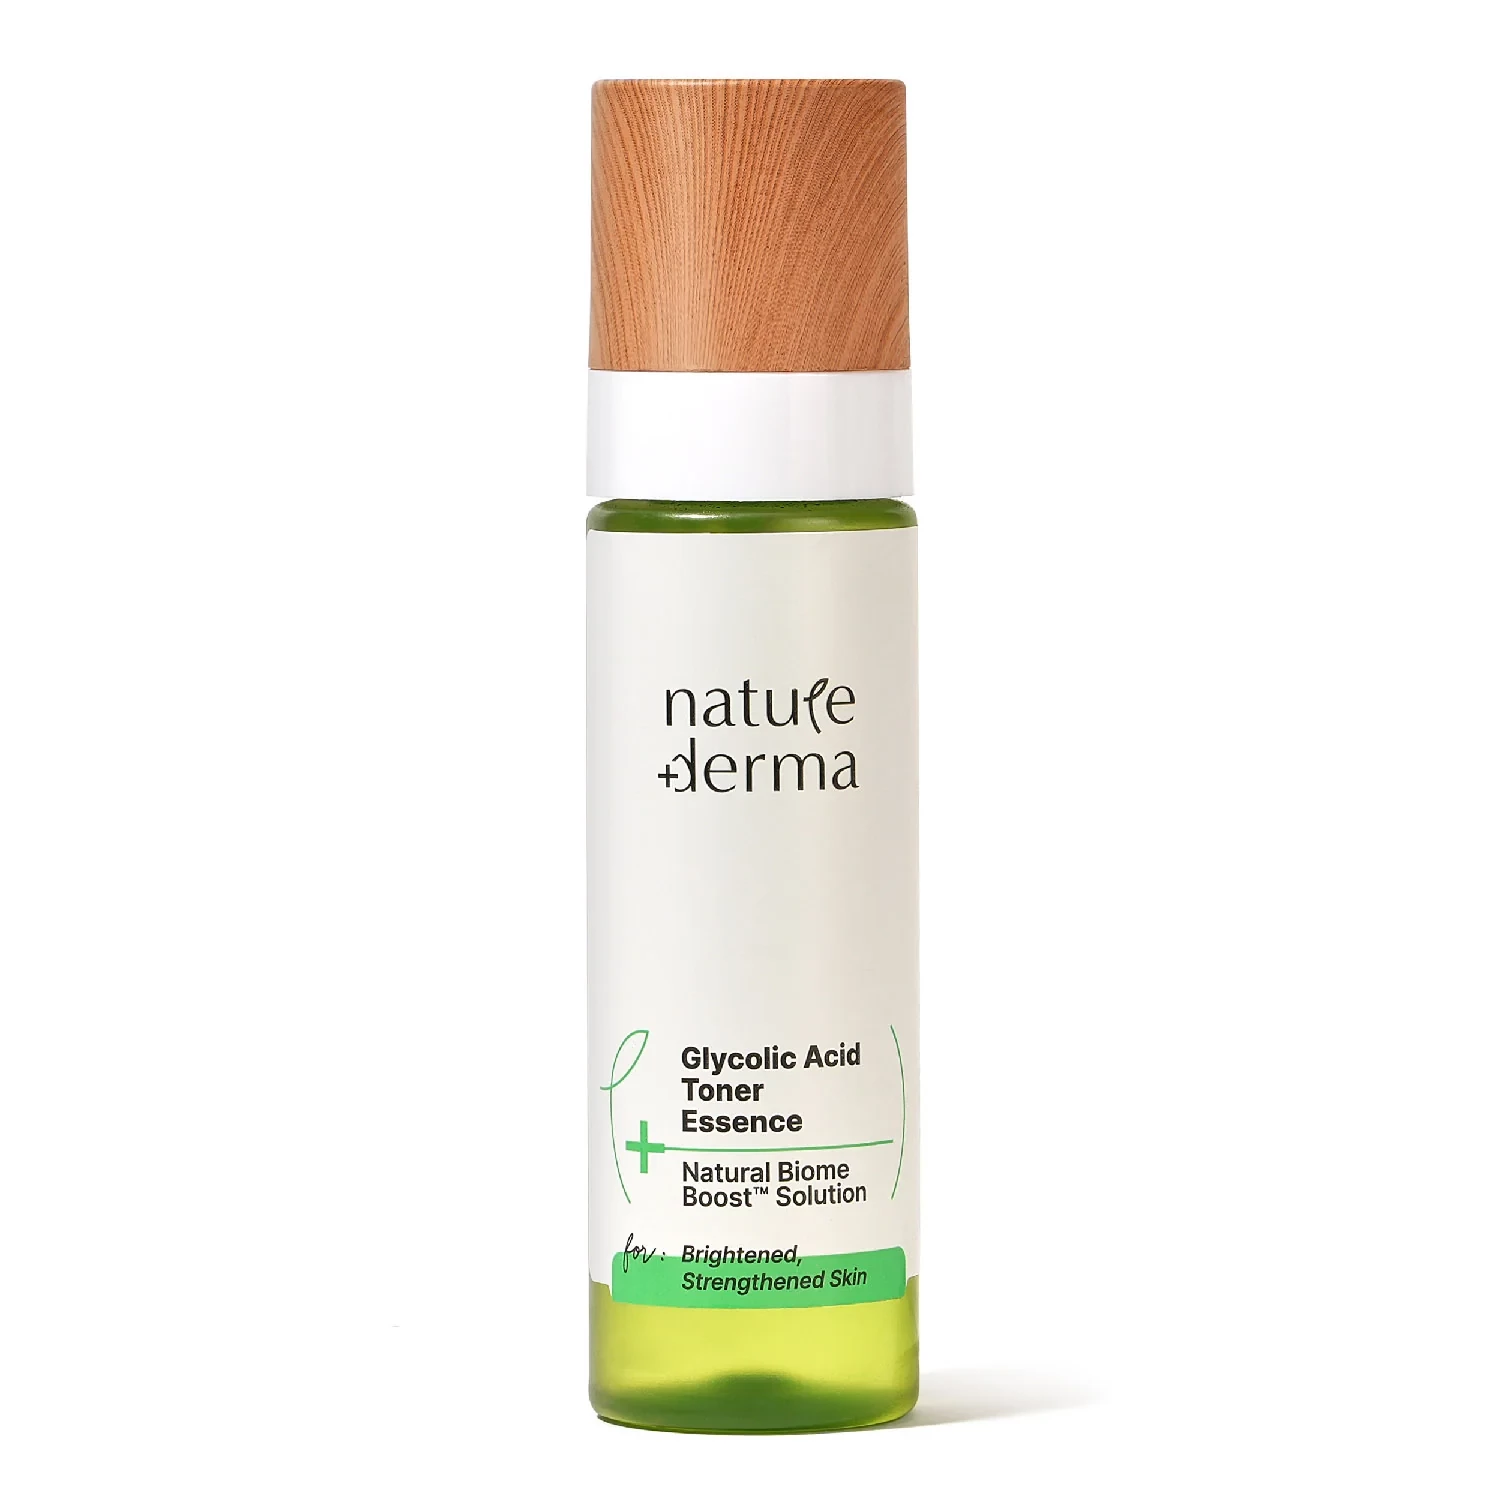 Nature Derma Glycolic Acid Toner Essence With Natural Biome-Boost™ Solution - 100 Ml